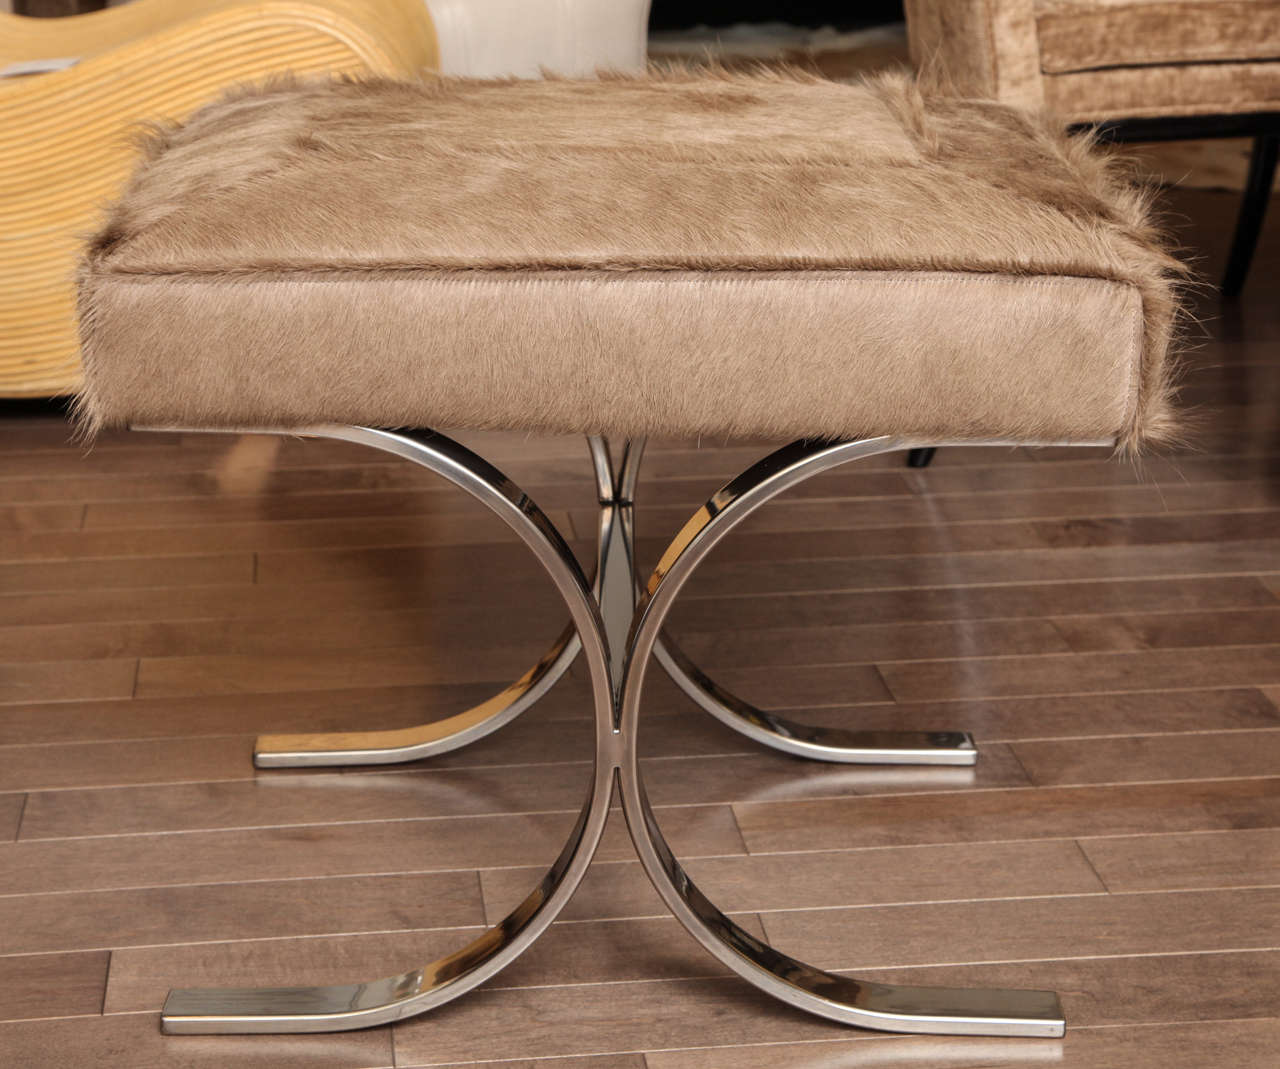 American Pair Of Chrome Stools With Taupe Cowhide, c. 1970